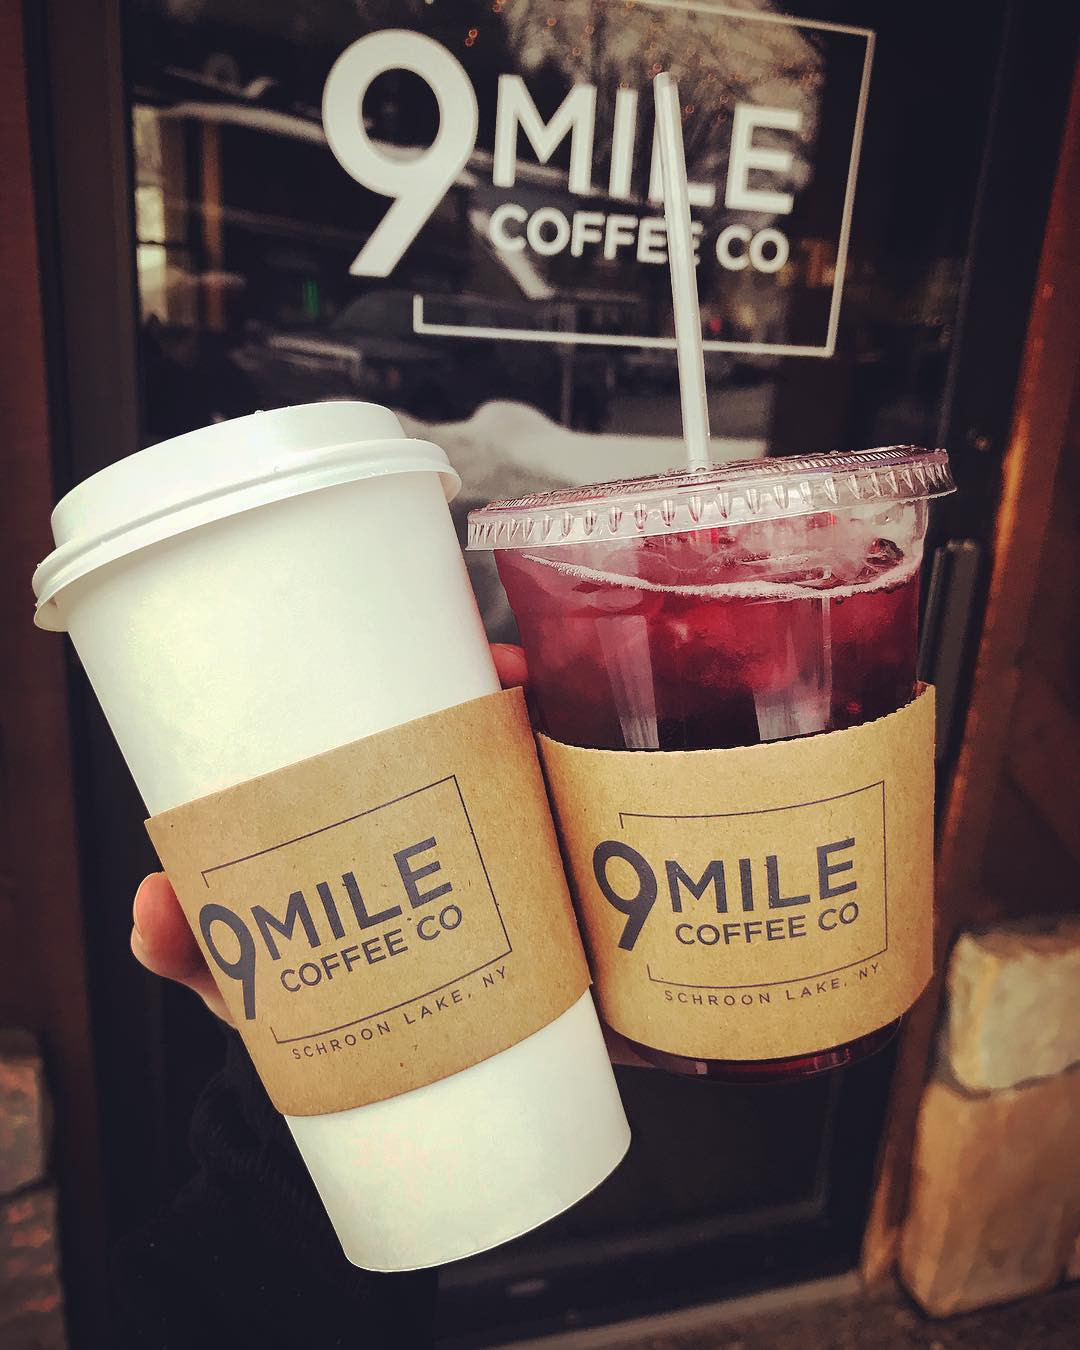 Some of the delicious drinks served up at 9 Mile Coffee Co.